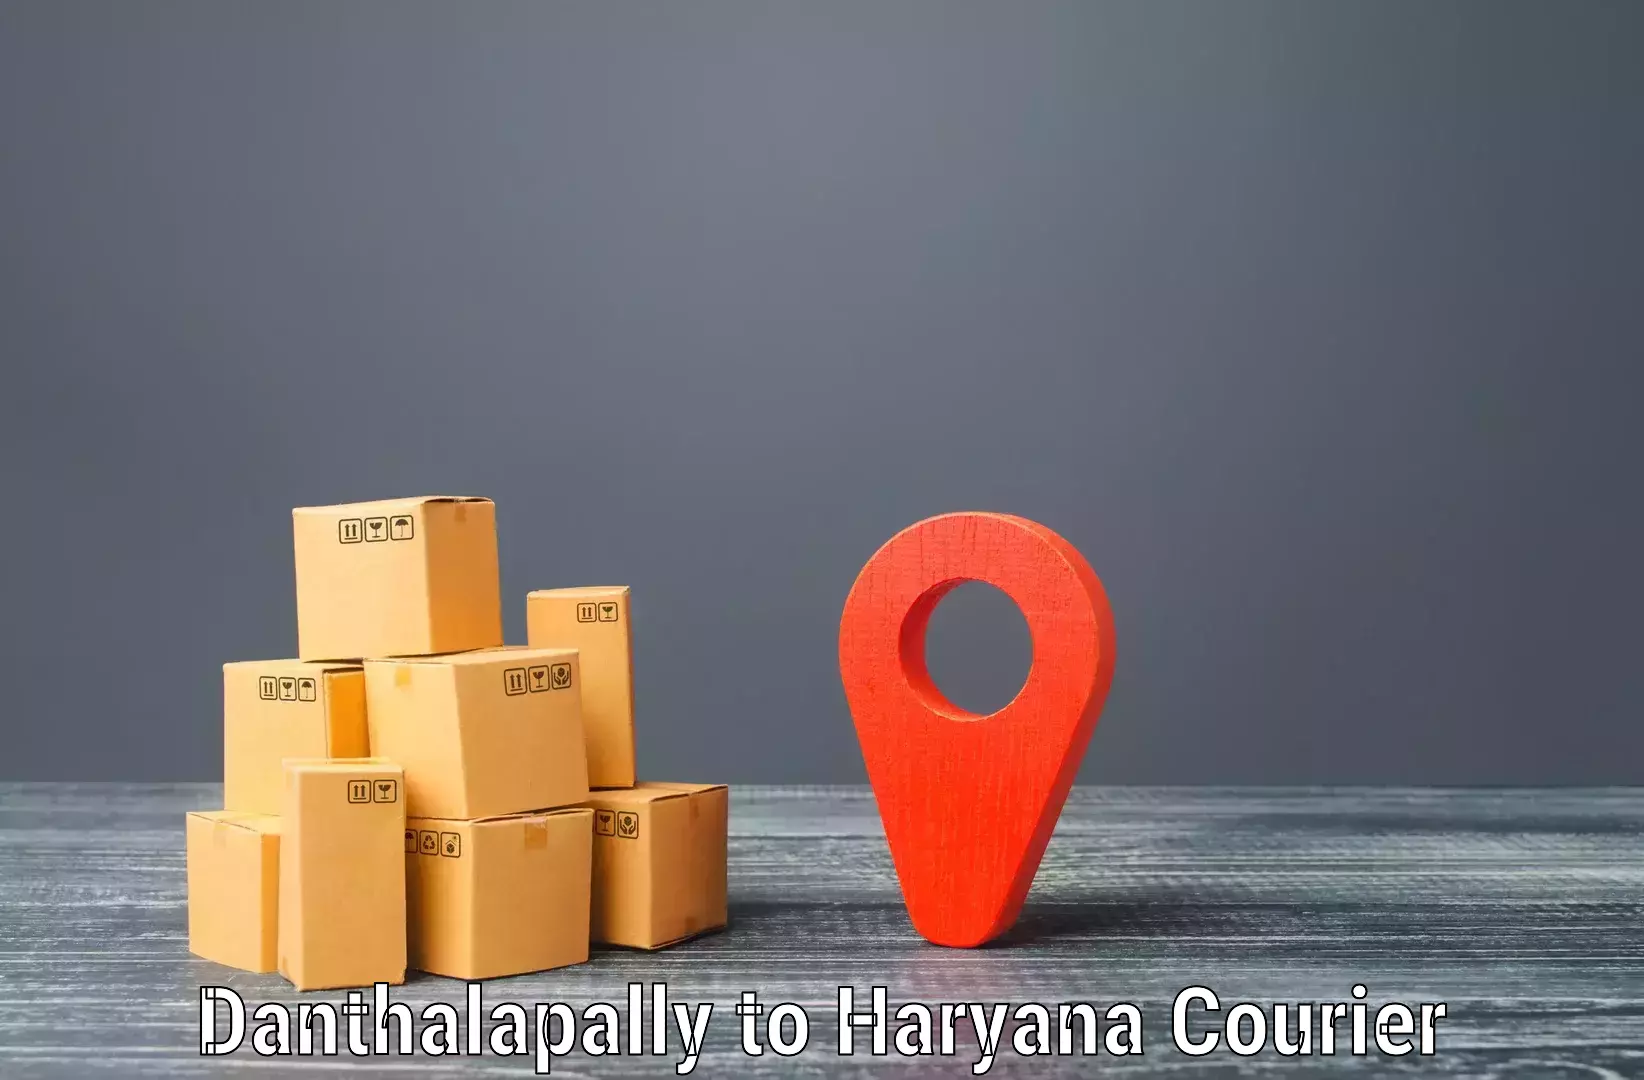 Residential courier service Danthalapally to Chirya